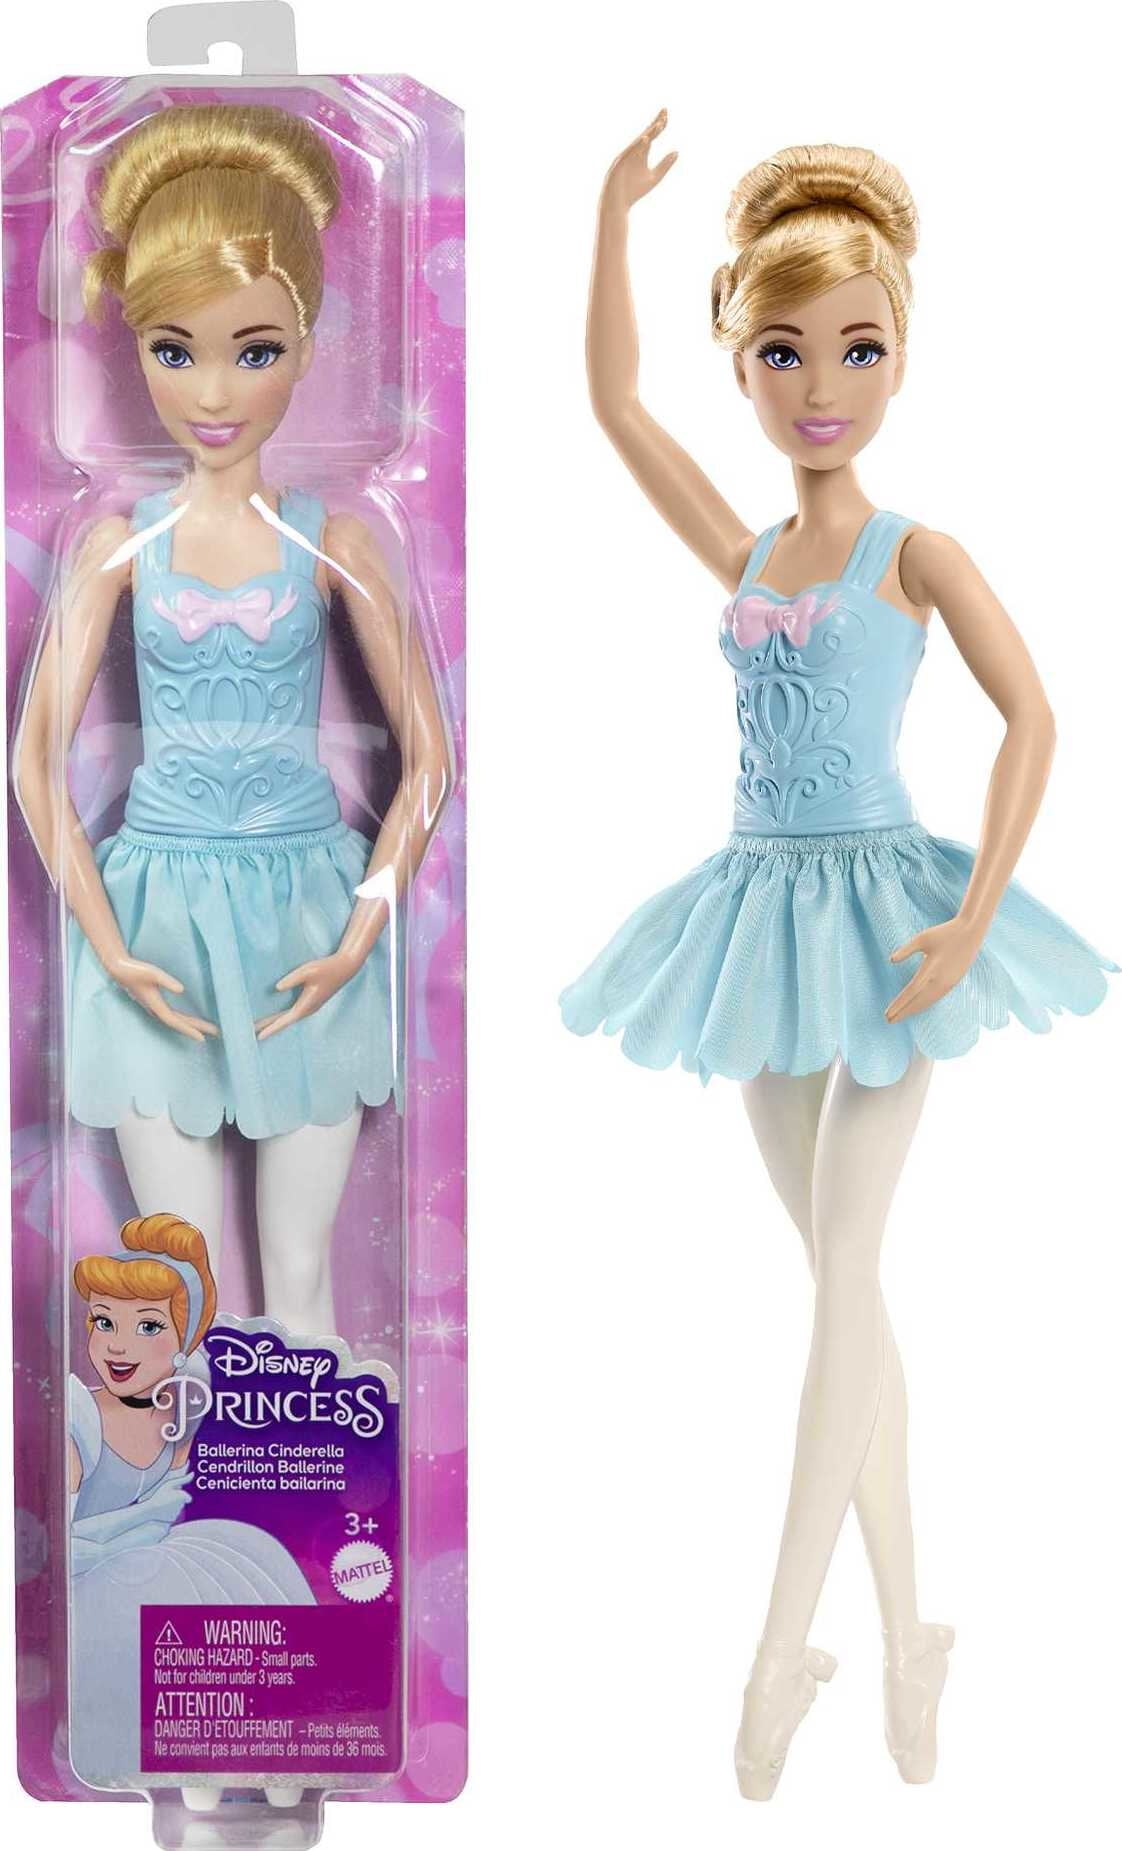 Disney Princess Ballerina Cinderella Fashion Doll with Posable Arms and Legs, New for 2023